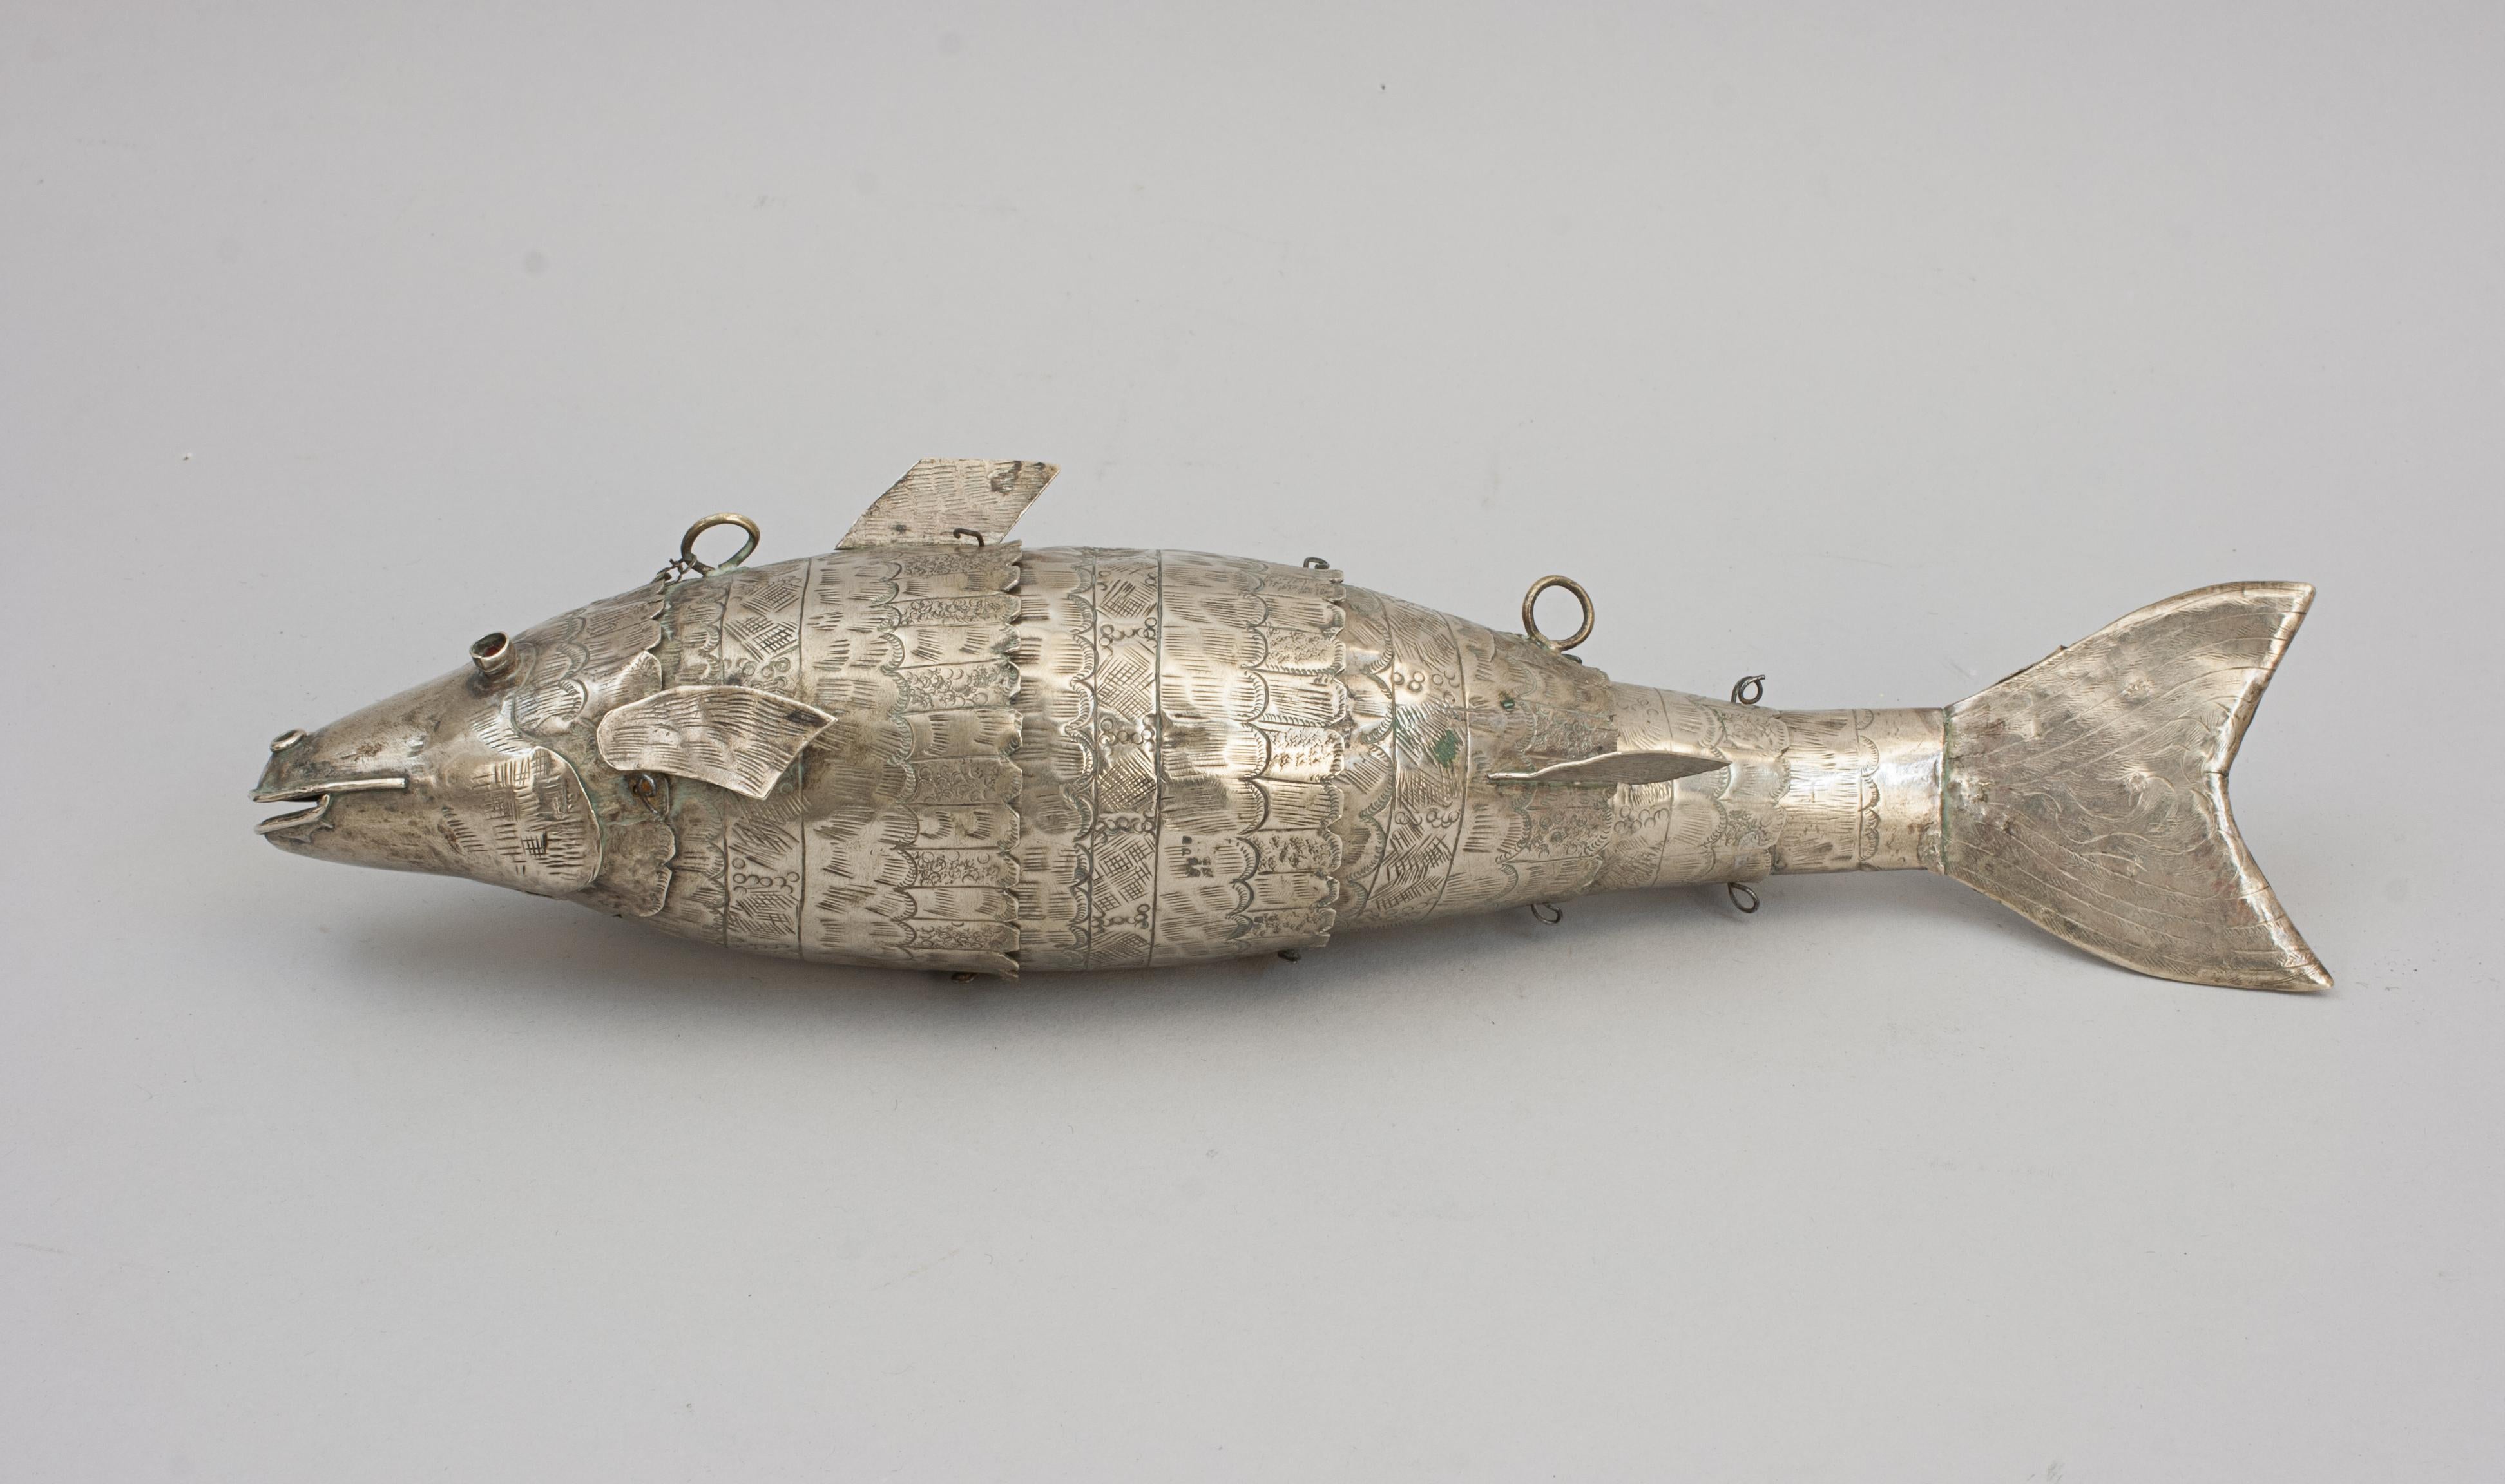 Articulated Metal Fish.
A late 19th/early 20th century metal articulated fish. The fish is made of plated brass, the head is connected to an articulated body with tail fin. The fish is made up of six moving parts with engraved scales. The fish is in